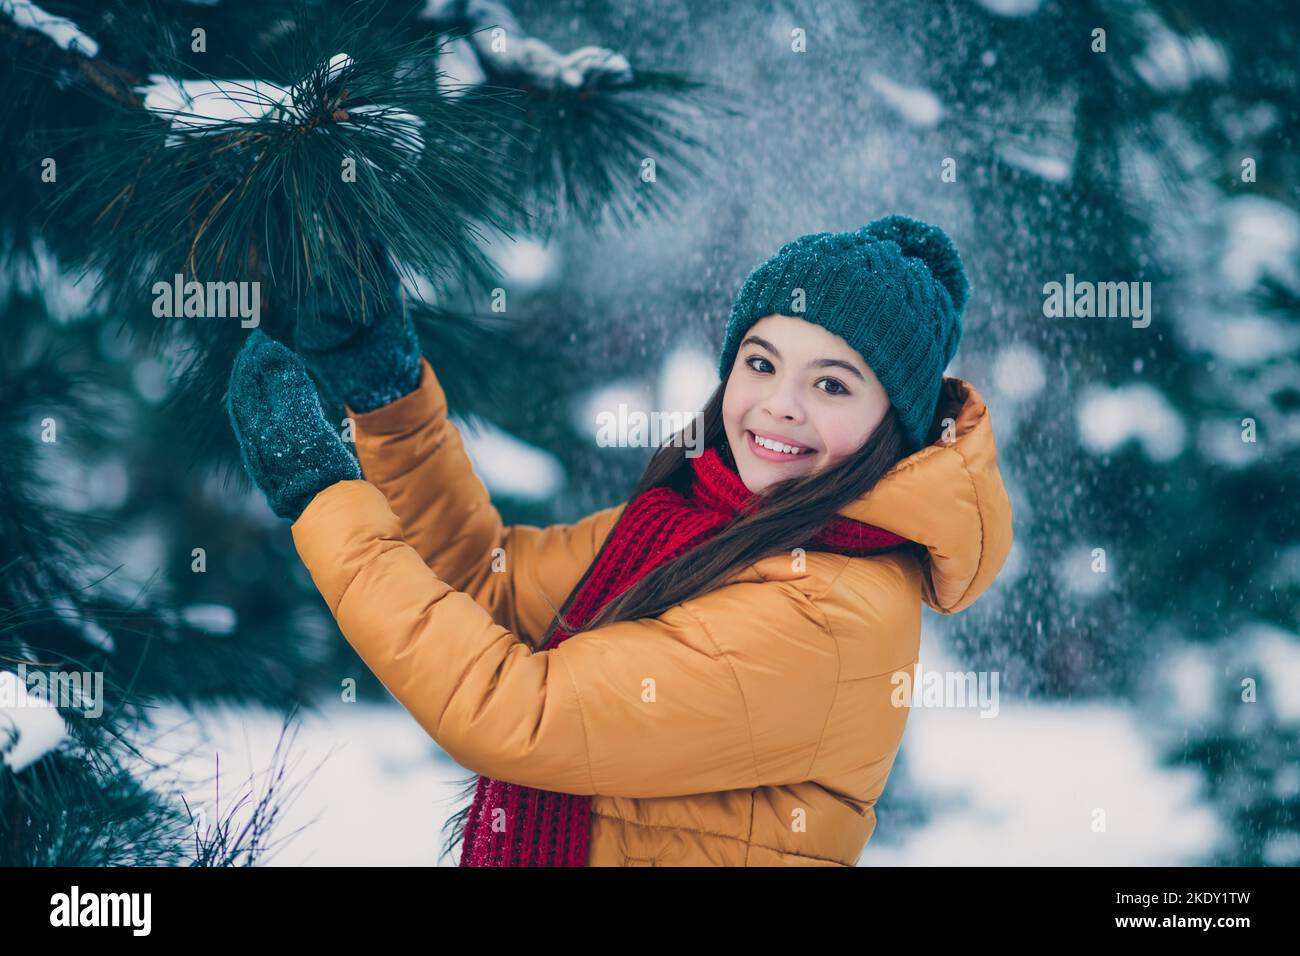 Profile side view portrait of attractive cheerful pre-teen girl wearing warm outfit visiting wild wood touching tree outdoors Stock Photo